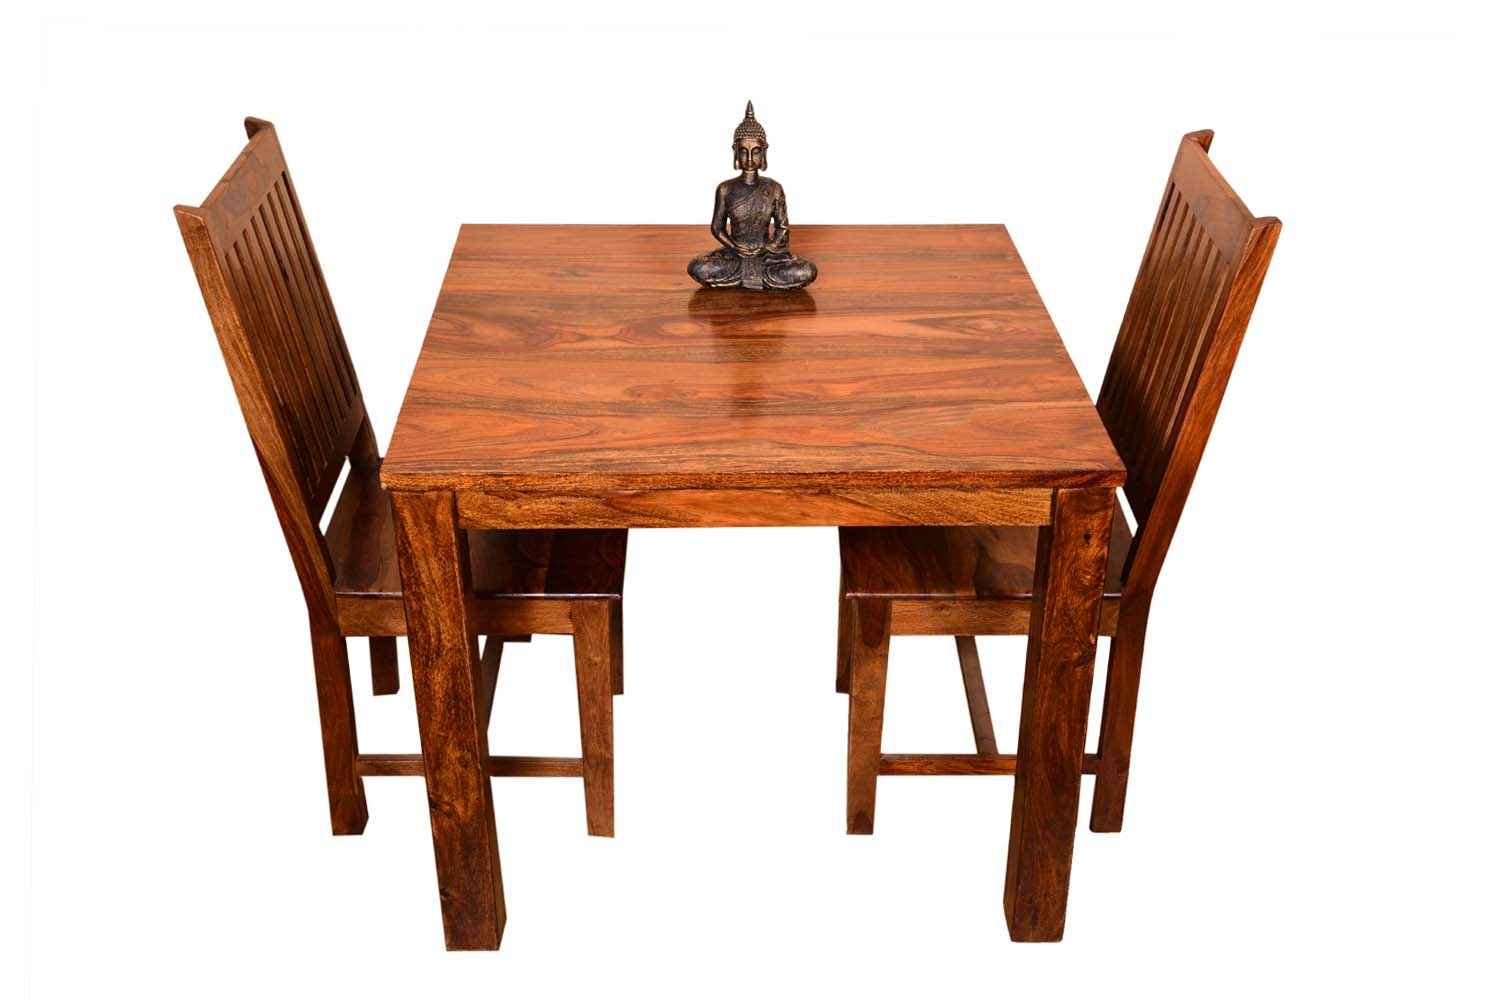 4 seat square kitchen table